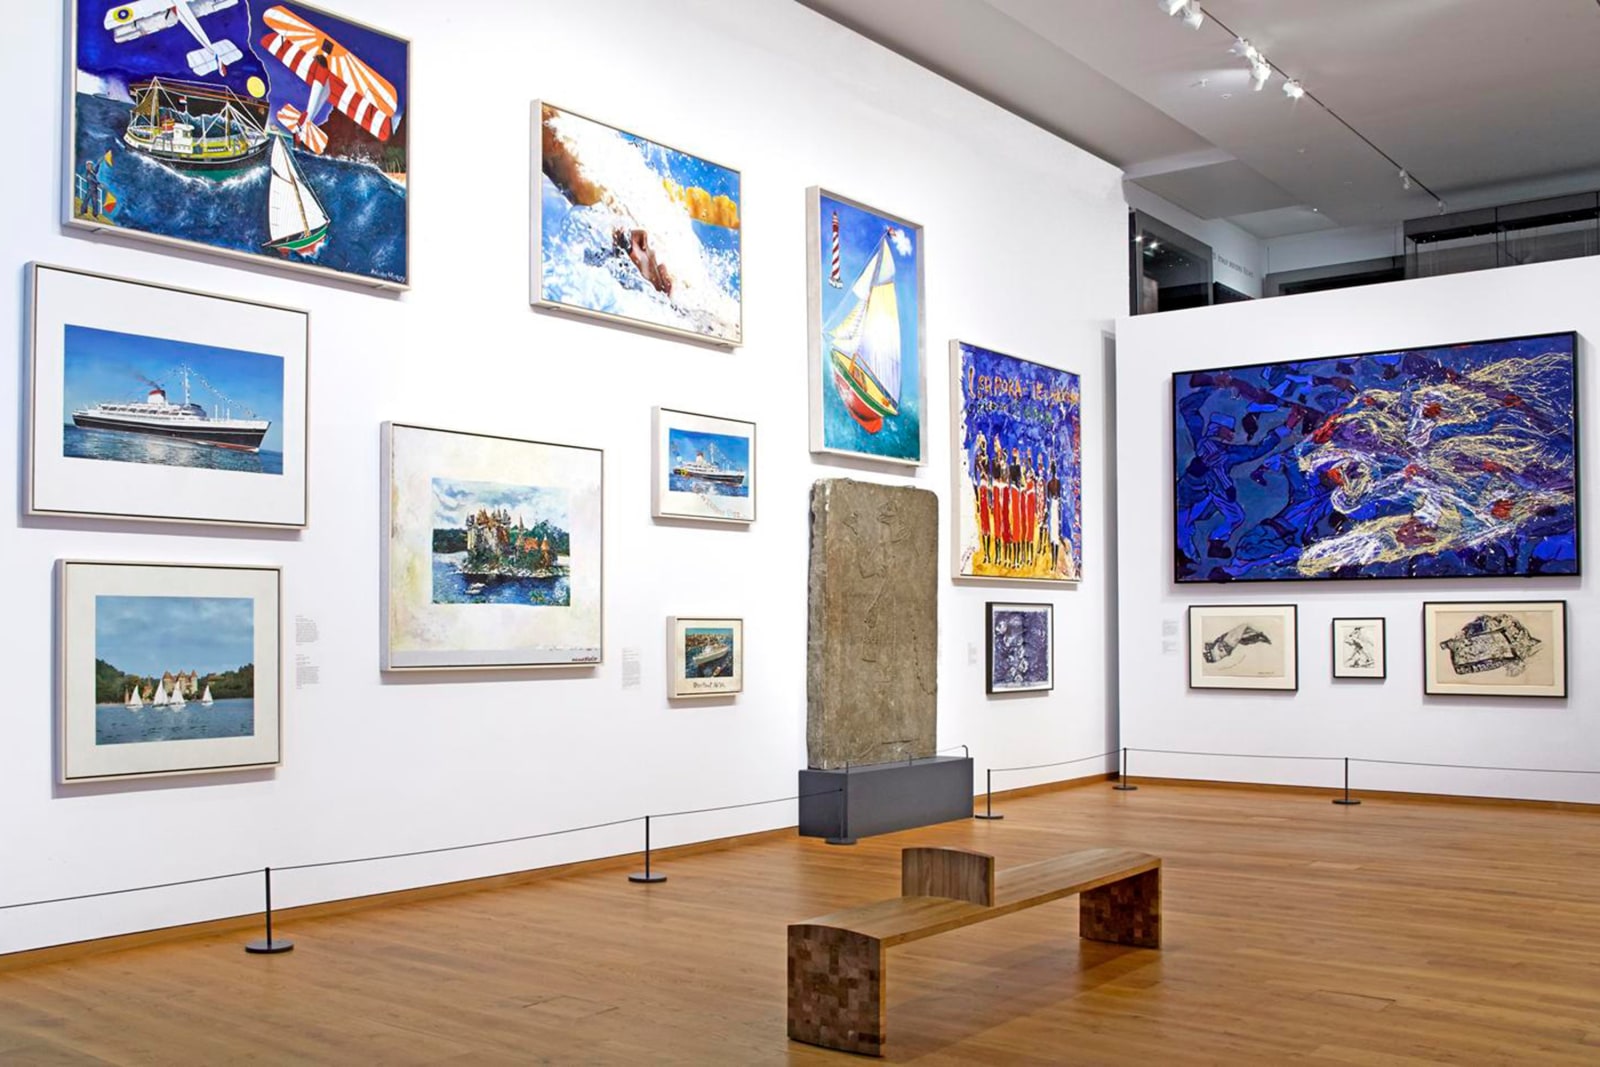 Installation view, Malcolm Morley at the Ashmolean: Paintings and Drawings from the Hall Collection, Ashmolean Museum of Art and Archaeology, University of Oxford, Oxford, UK, 2013